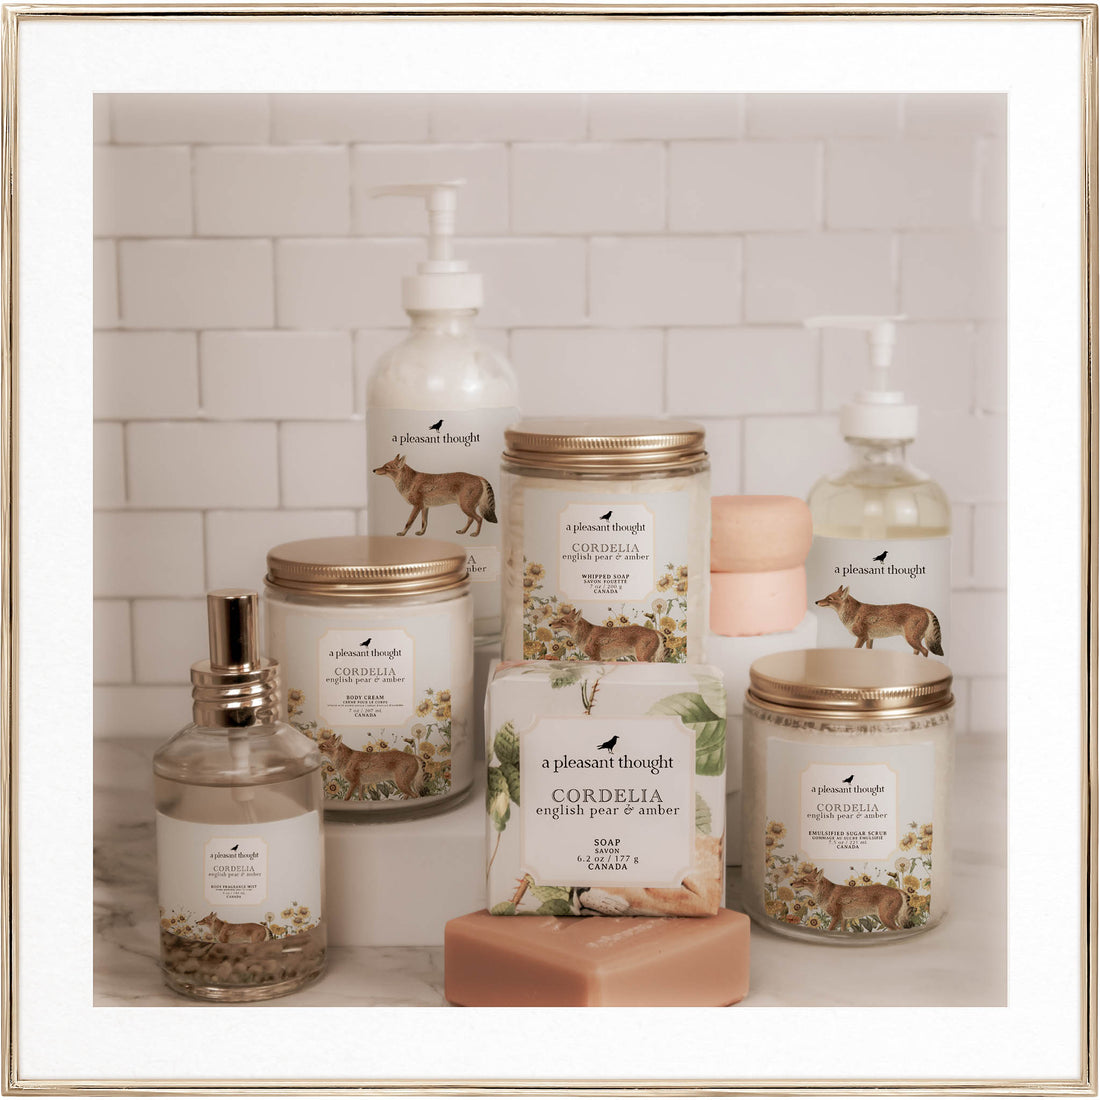  cordelia bath and body a pleasant thought